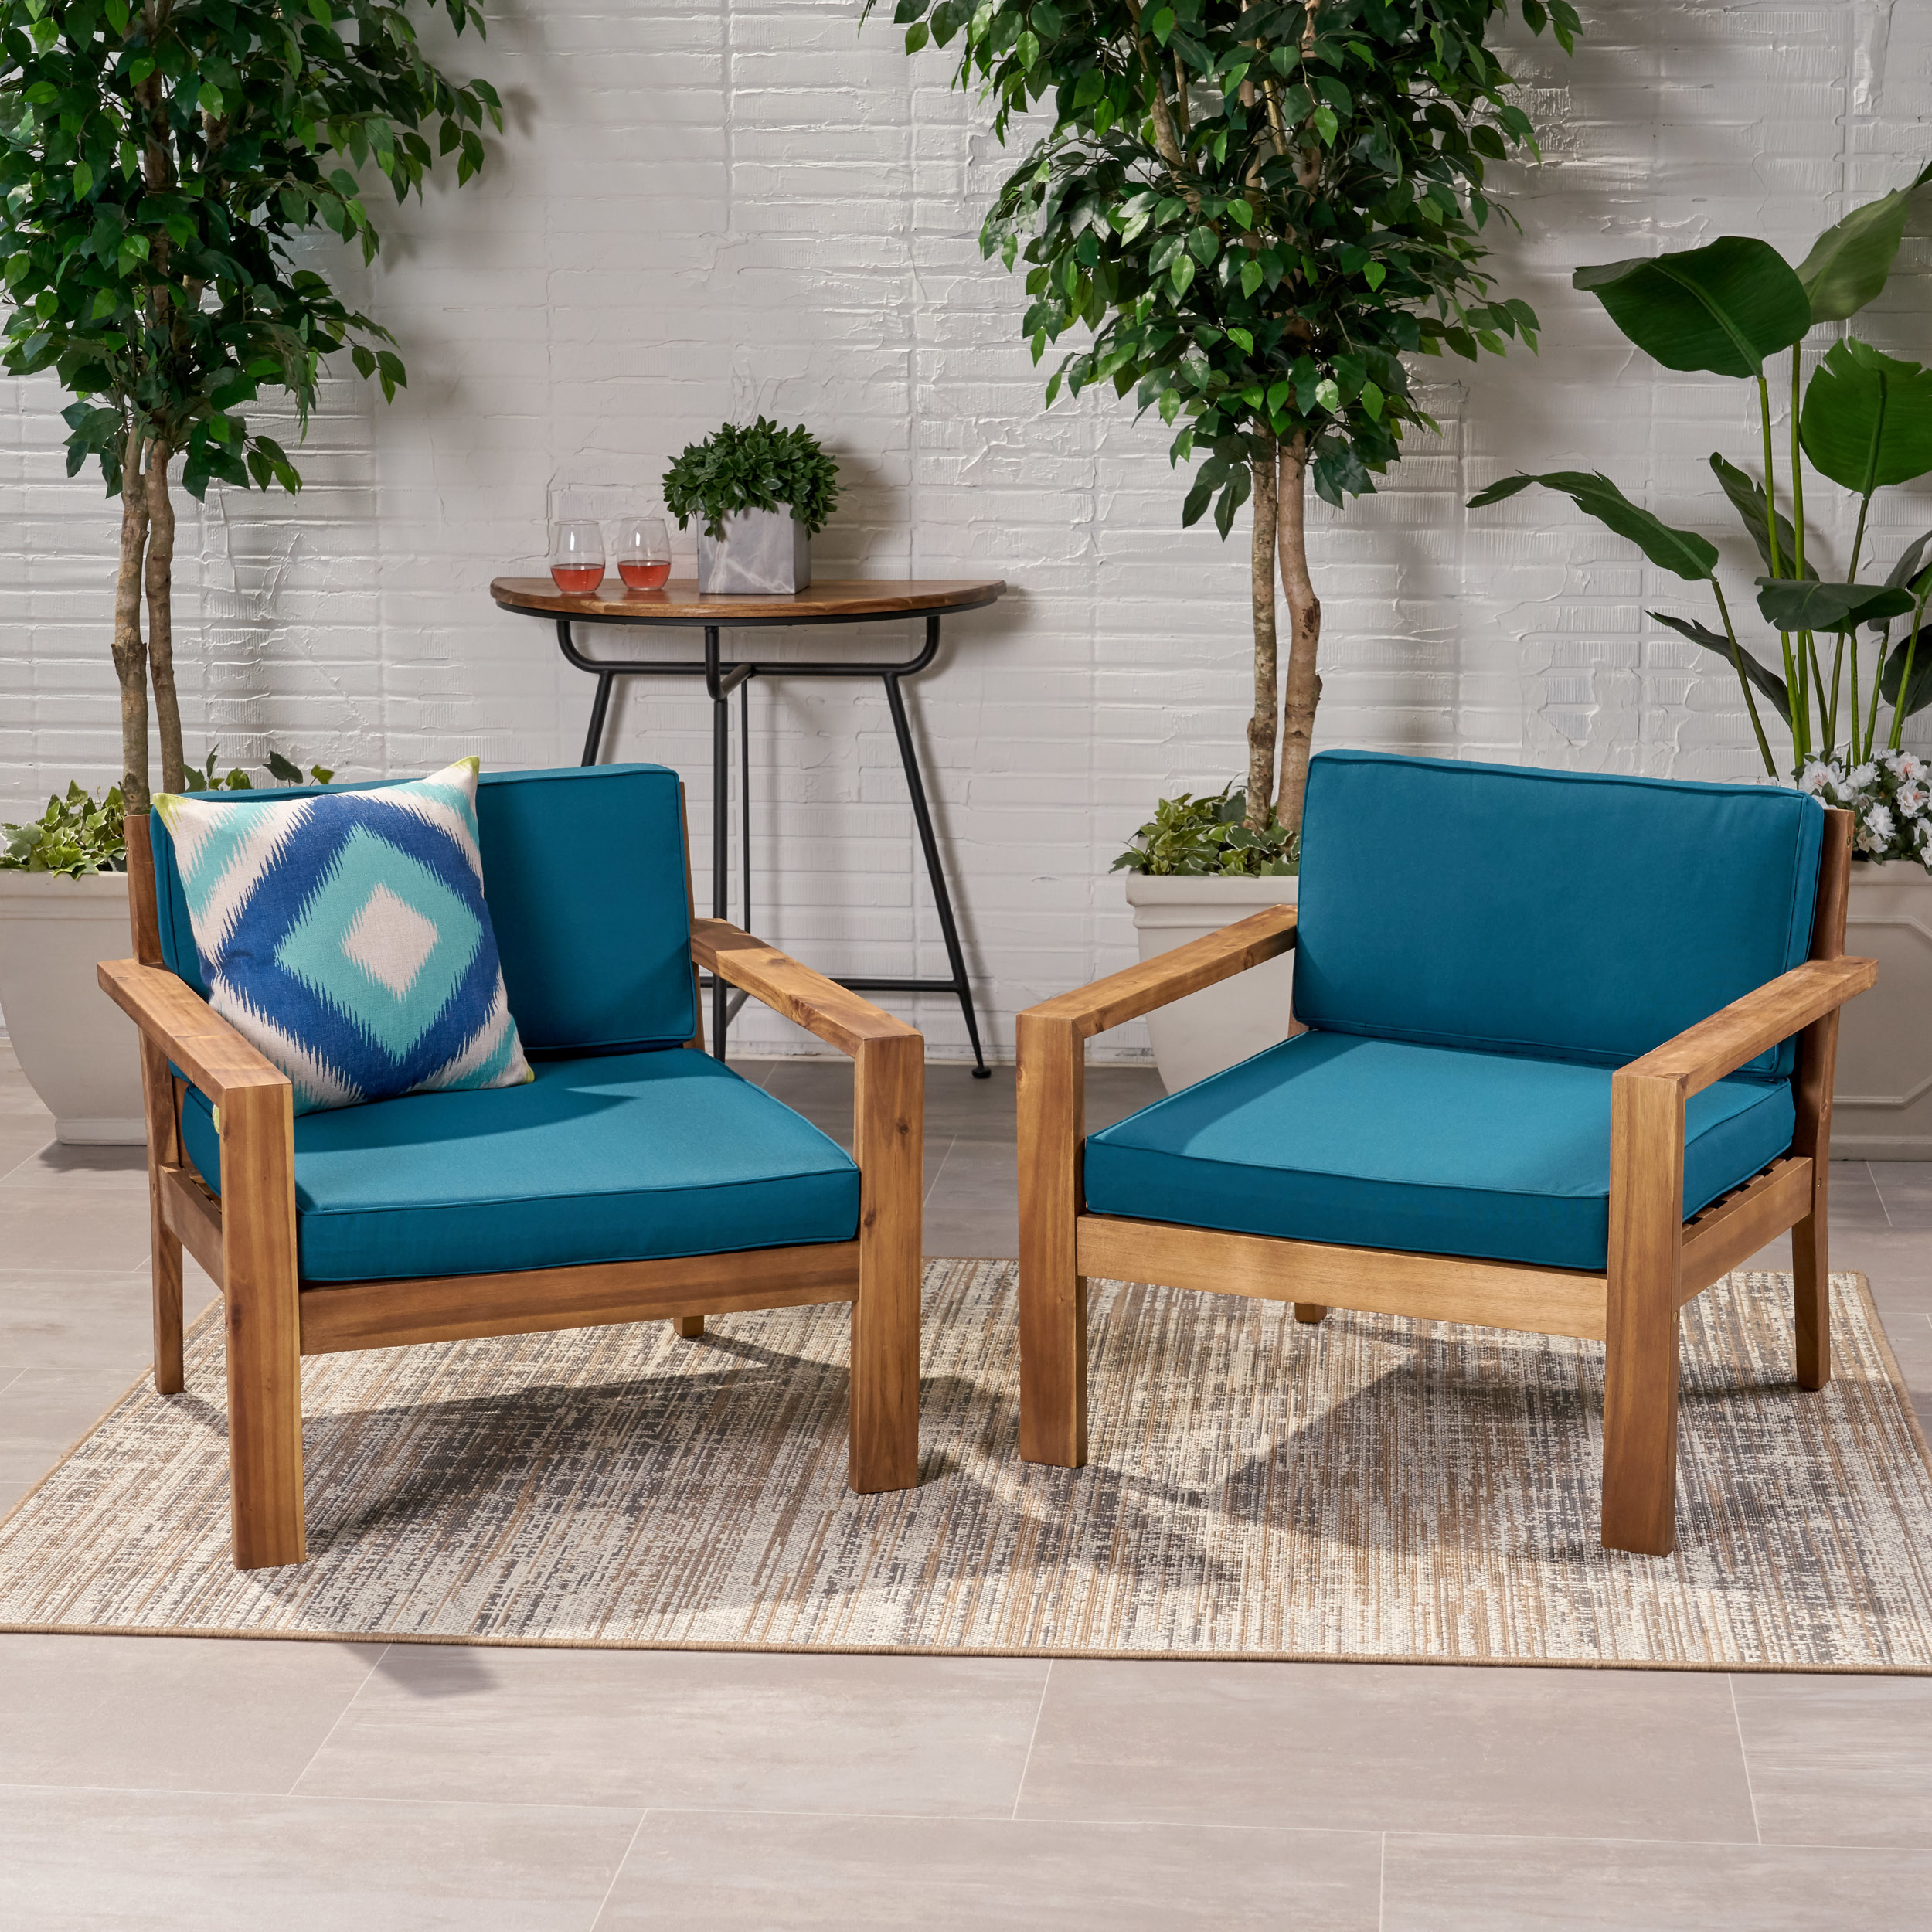 Afra Outdoor Acacia Wood Club Chairs With Cushions (Set Of 2) - Teak Finish, Dark Teal